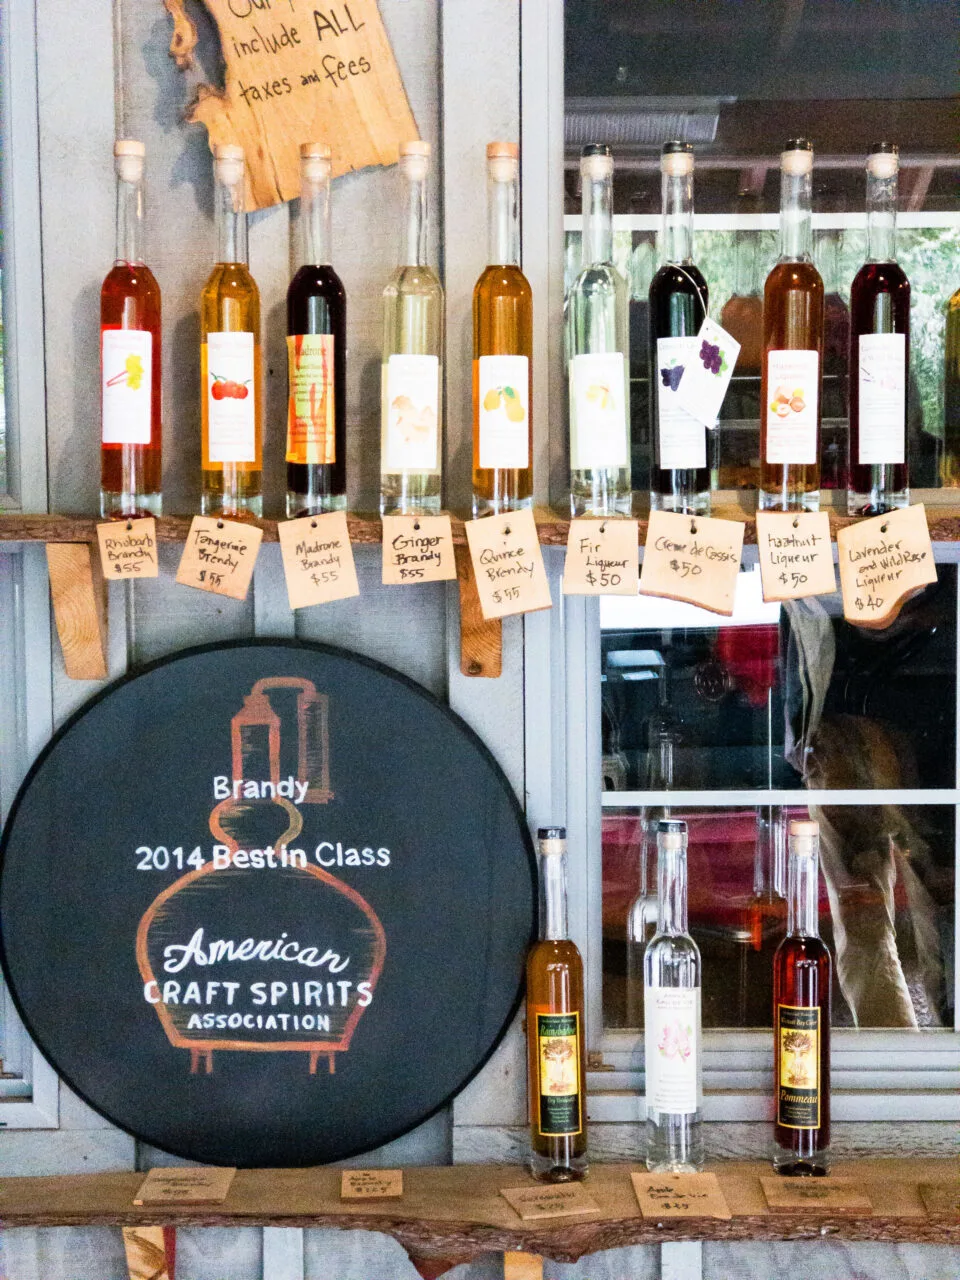 Another artisanal product are the liqueurs and gin of the San Juan Island Distillery.